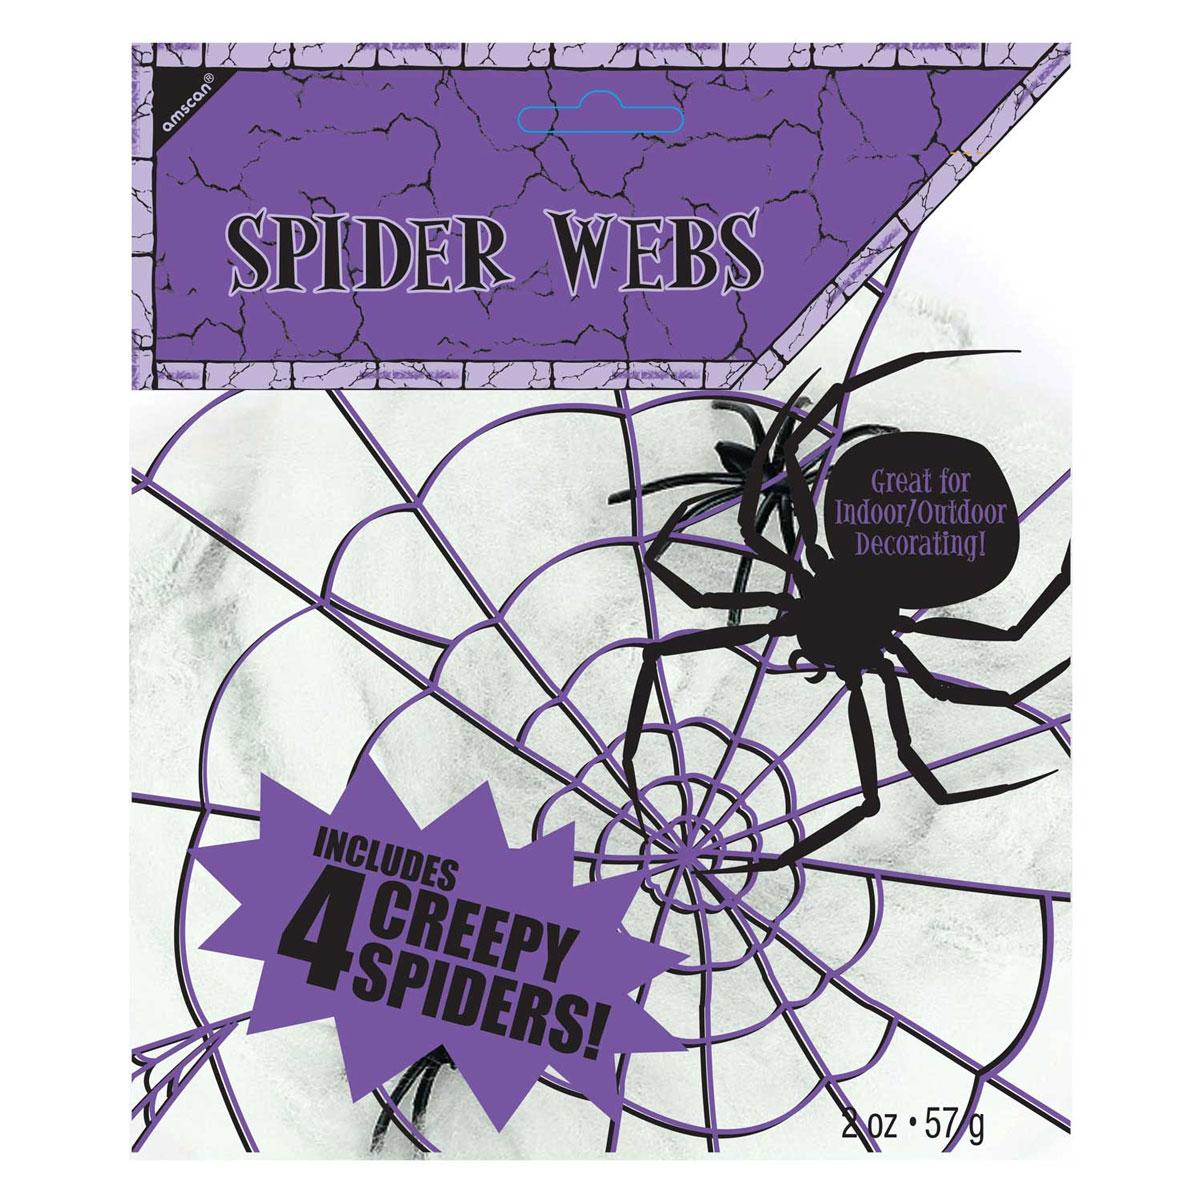 White Spider Web 57gr (2oz) with 4 Spiders by Amscan 34807 available here at Karnival Costumes online Halloween paryy shop